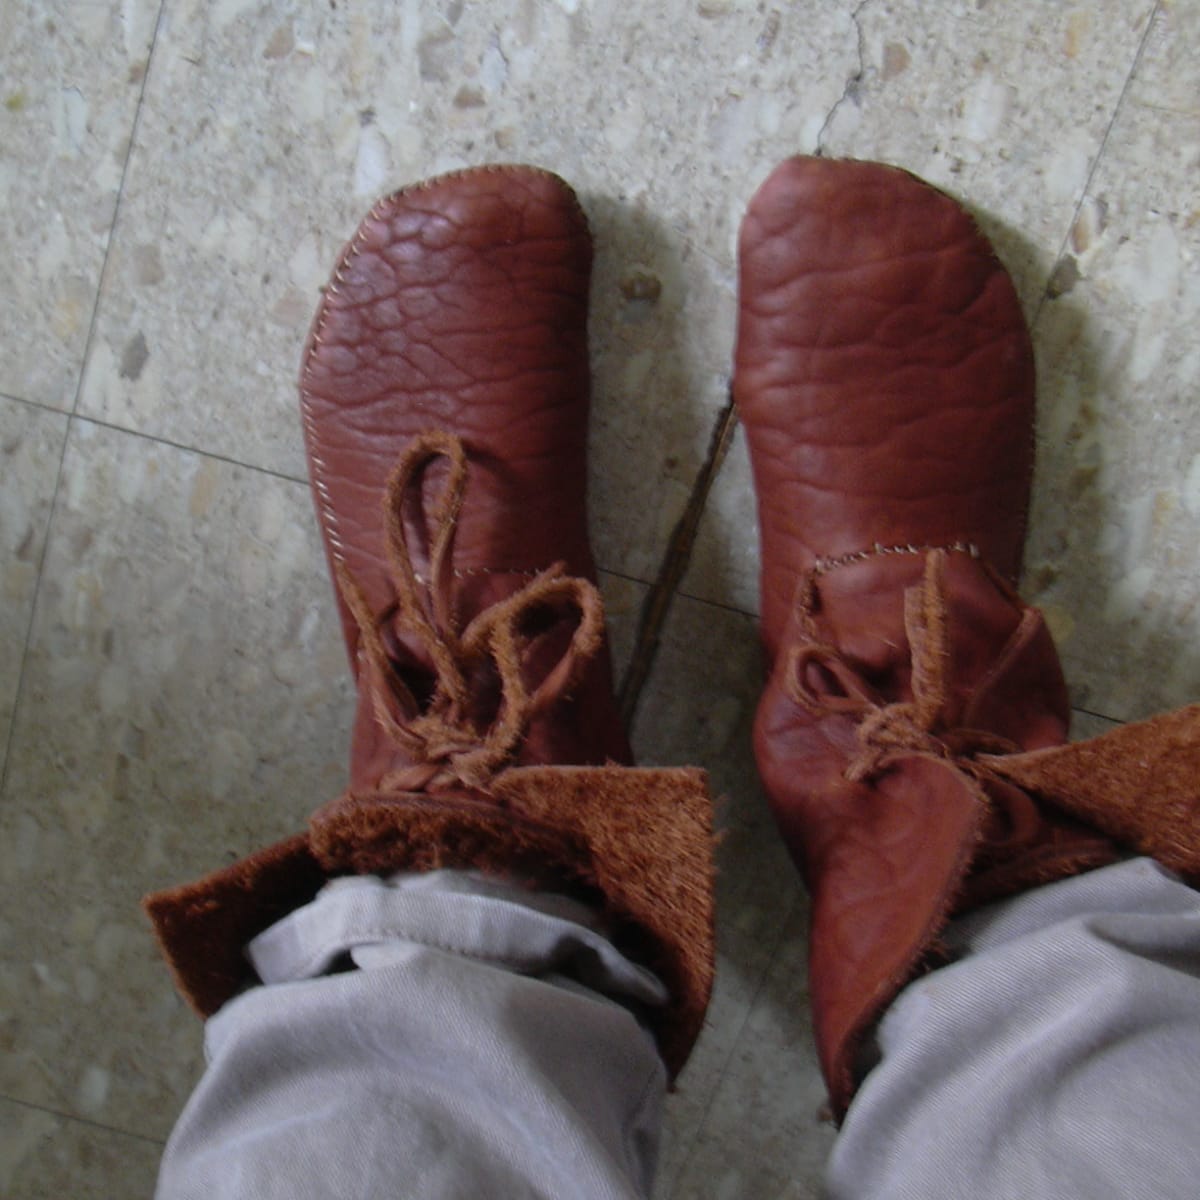 making your own moccasins